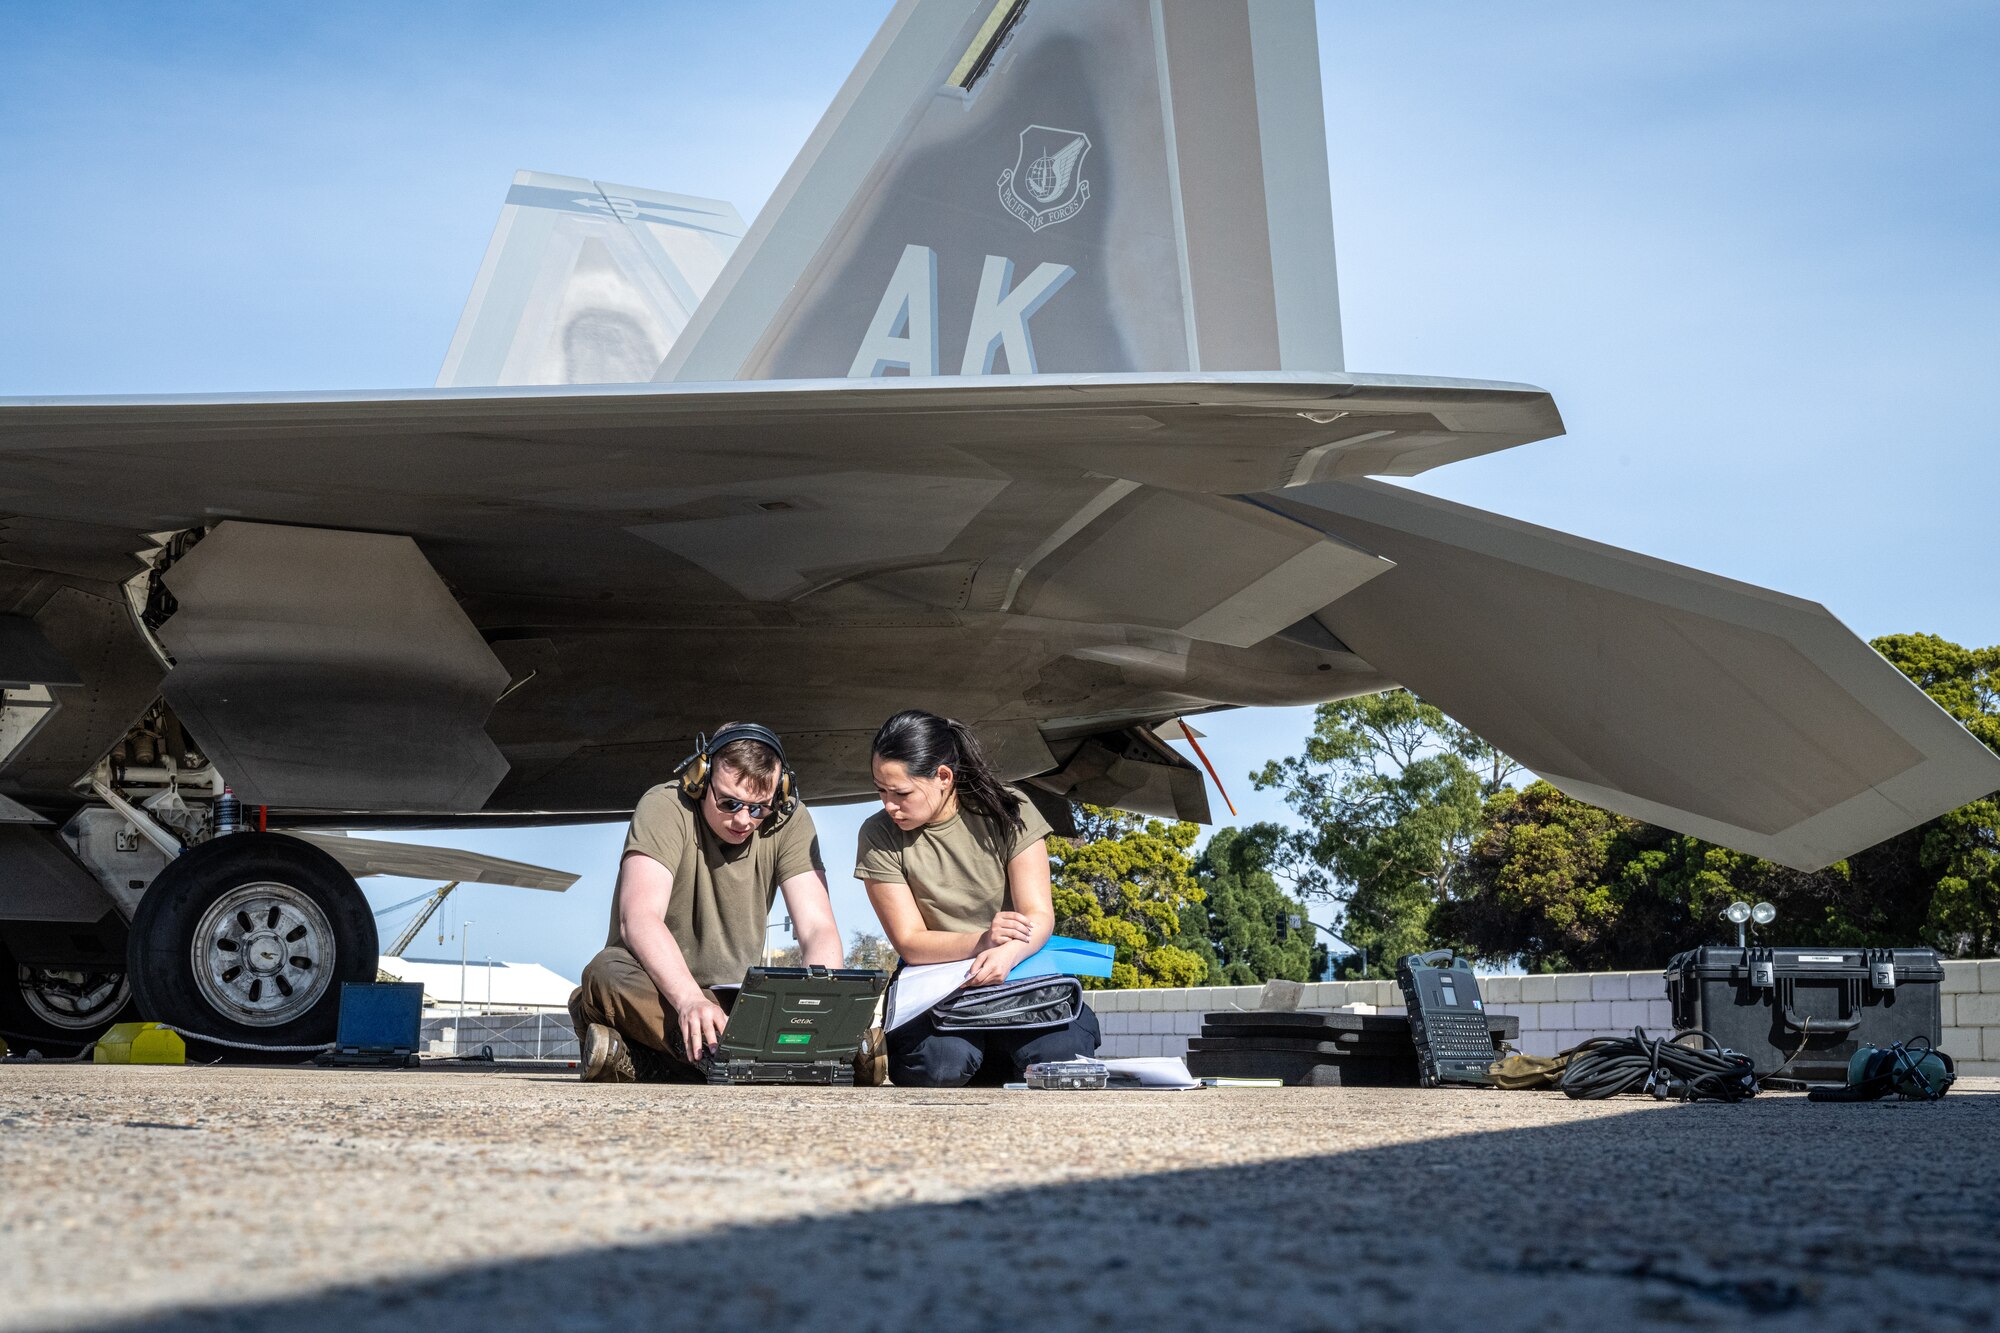 U.S. Air Force Senior Airman Jared Garich (left), an F-22 Raptor dedicated crew chief, and U.S. Air Force Senior Airman Sophia Canelas, an F-22 Raptor avionics specialist, both deployed with the 525th Expeditionary Fighter Generation Squadron, 3rd Air Expeditionary Wing, Joint Base Elmendorf-Richardson, Alaska, prepare a post-flight debrief during Exercise Bamboo Eagle 24-1 at Naval Air Station North Island, California, Jan. 28, 2024.